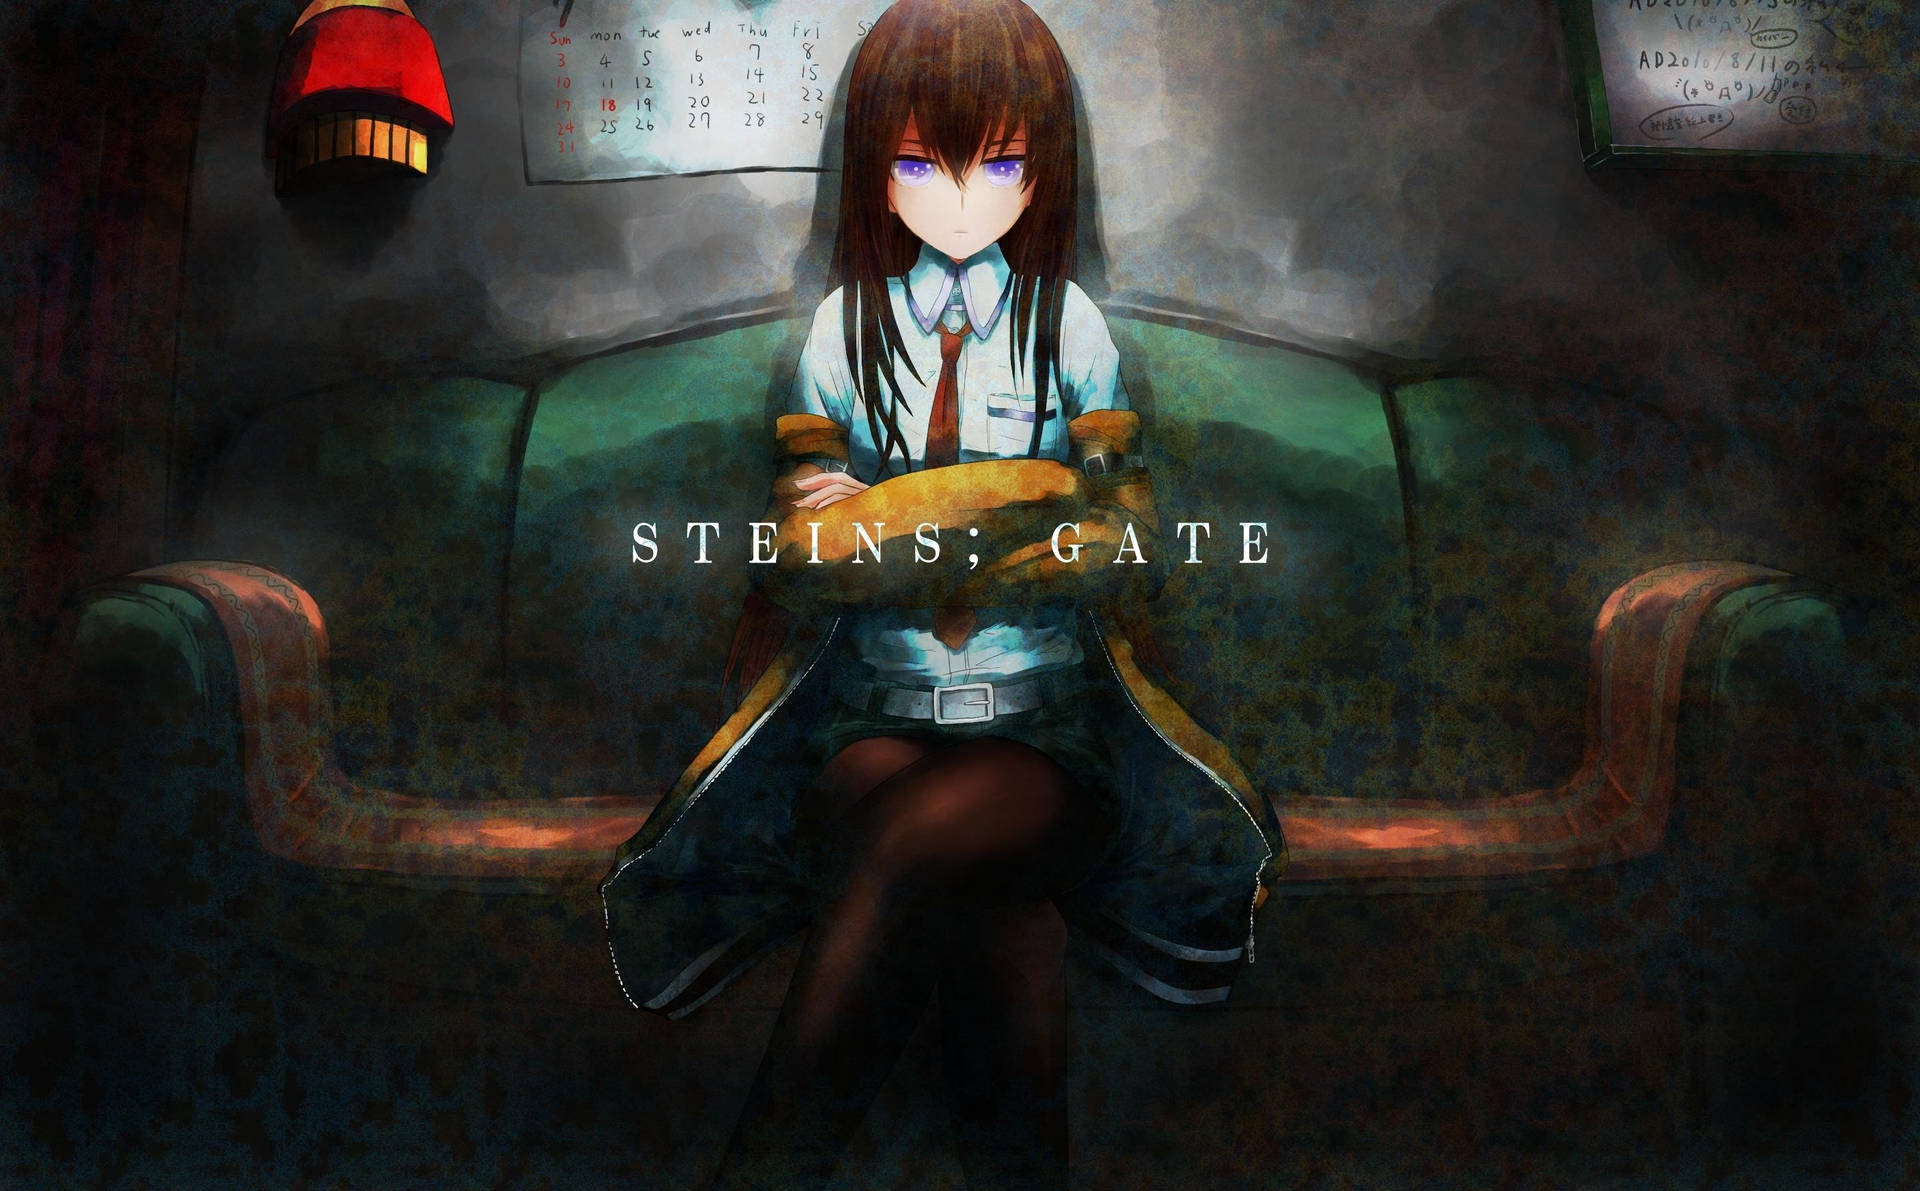 "Time travel is possible in Steins Gate!" Wallpaper